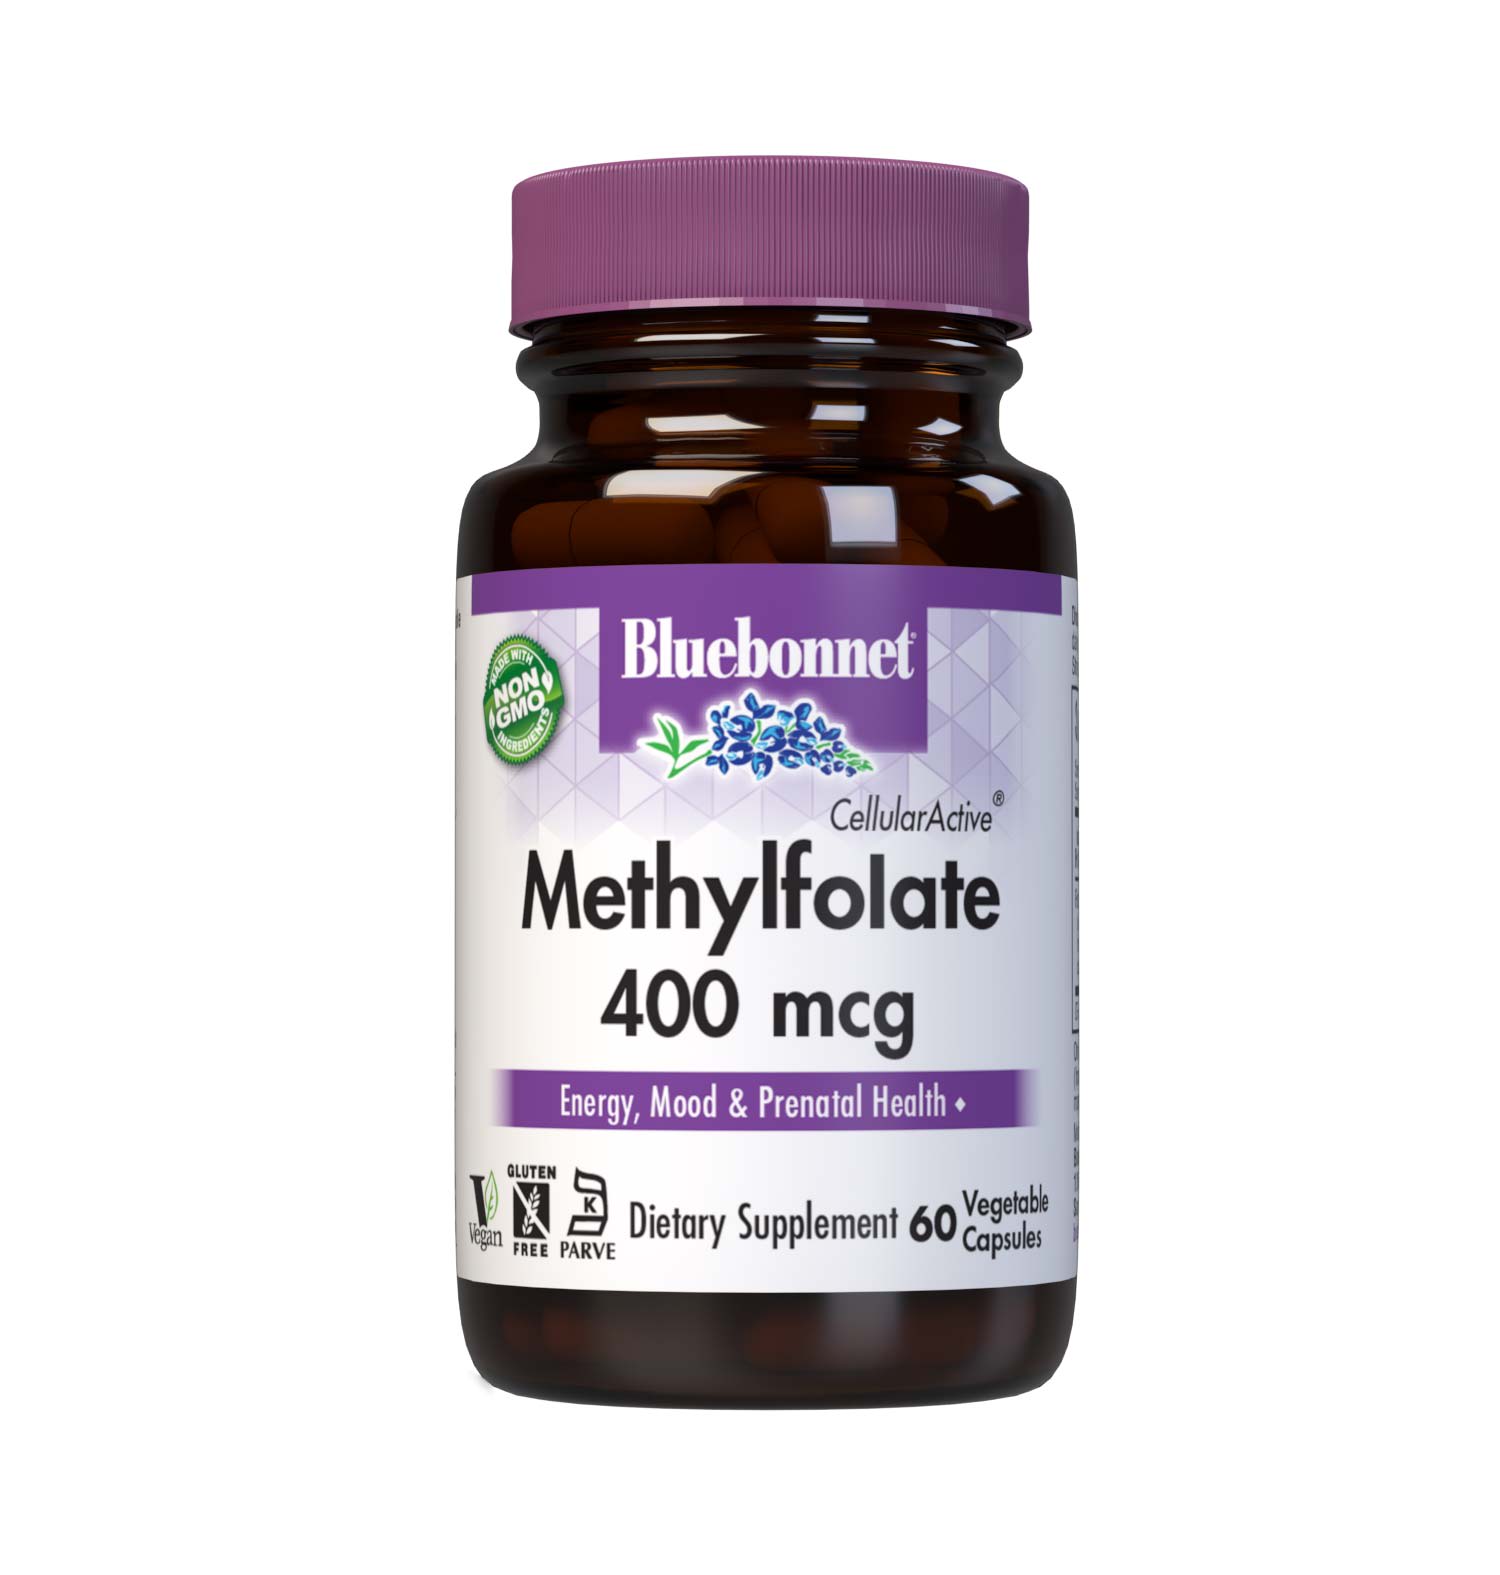 Bluebonnet’s CellularActive Methylfolate 400 mcg Vegetable Capsules are formulated with Quatrefolic, a patented and clinically studied coenzyme form of folate for prenatal health, energy and vitality, as well as mood support. #size_60 count